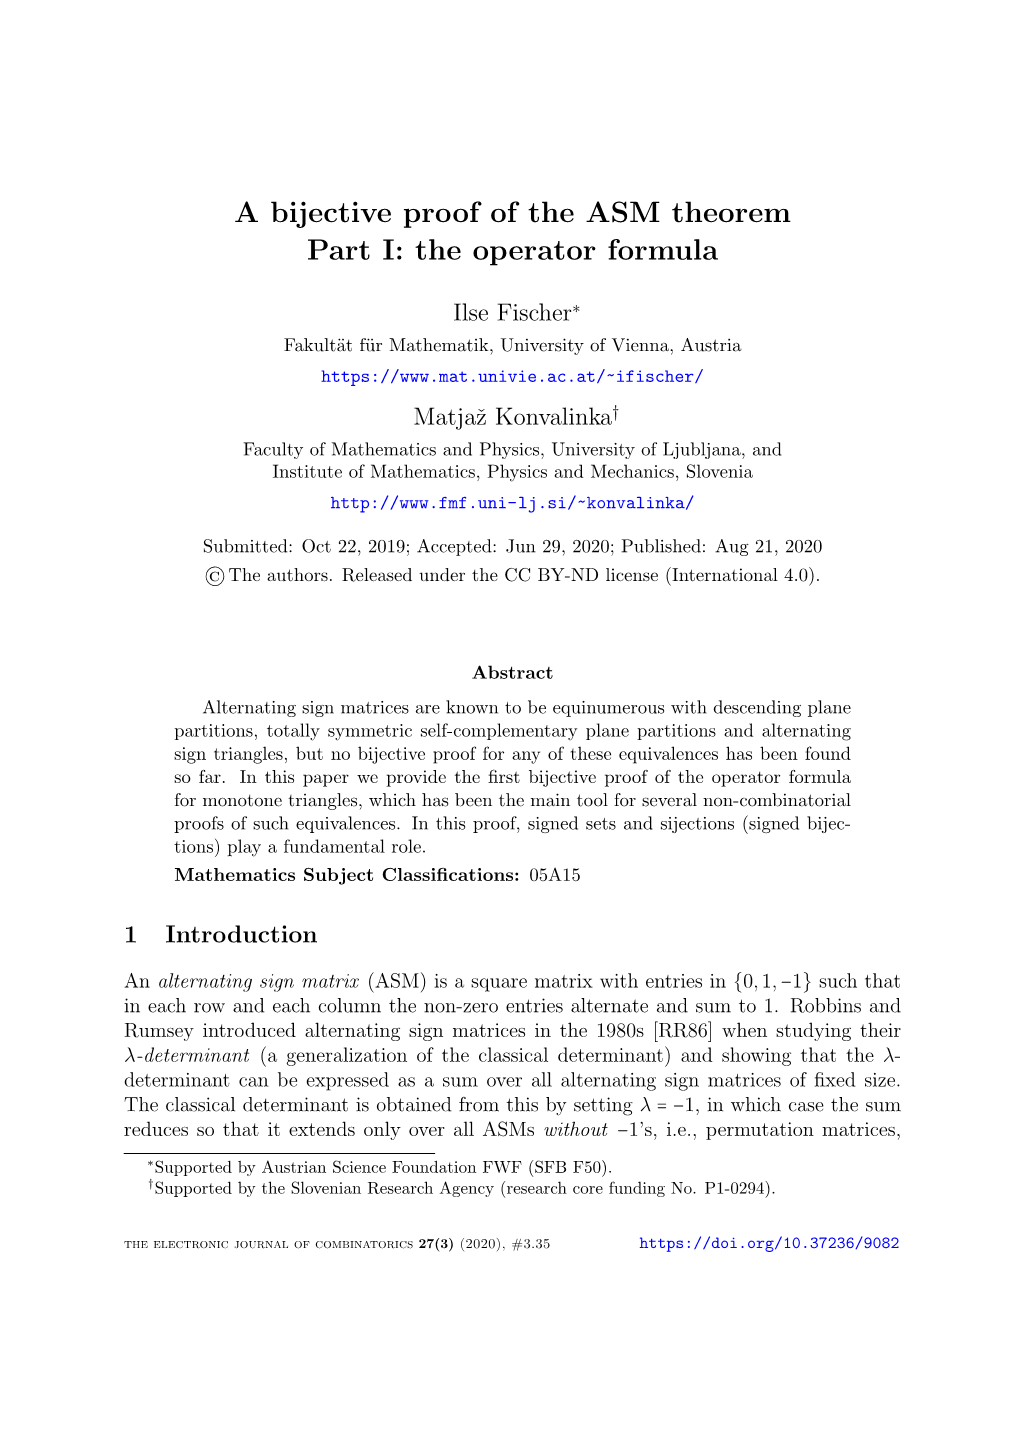 A Bijective Proof of the ASM Theorem Part I: the Operator Formula